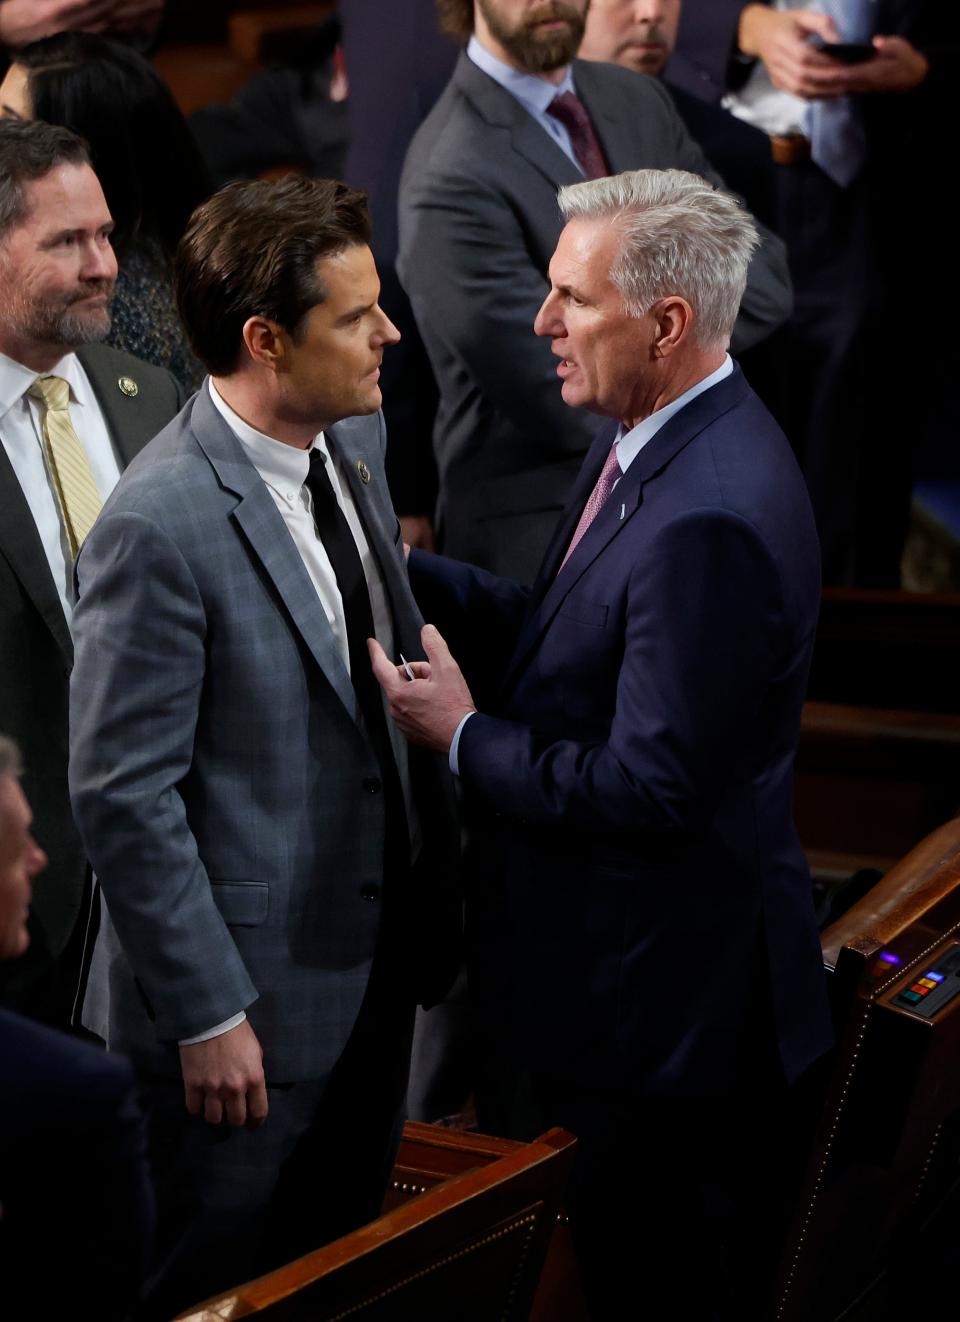 House Republican Leader Kevin McCarthy, R-Calif., talks to Rep.-elect Matt Gaetz, R-Fla., in the House Chamber during the fourth day of elections for Speaker of the House at the U.S. Capitol Building on Jan. 6, 2023 in Washington, DC. The House of Representatives is meeting to vote for the next Speaker after House Republican Leader Kevin McCarthy (R-CA) failed to earn more than 218 votes on several ballots; the first time in 100 years that the Speaker was not elected on the first ballot.